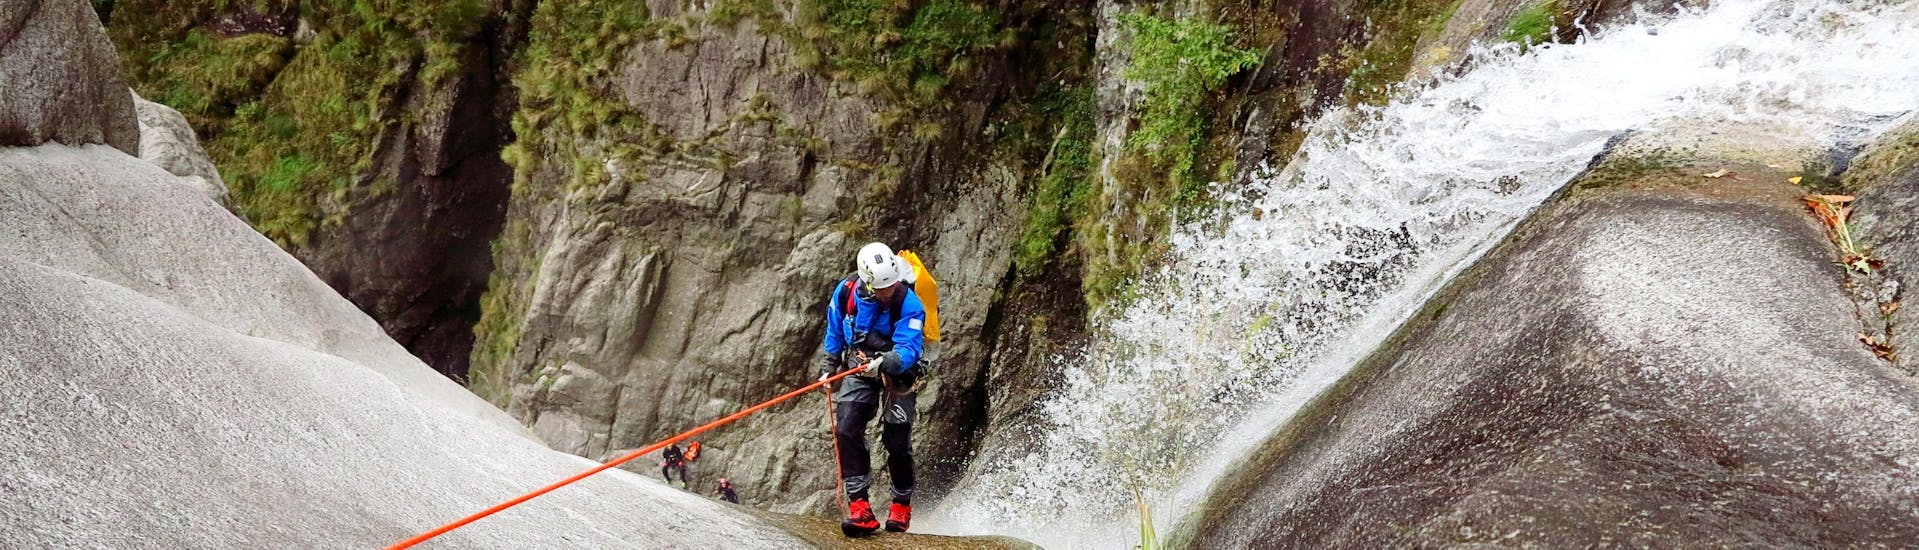 Gevorderde Canyoning in Piode - Rio Egua.